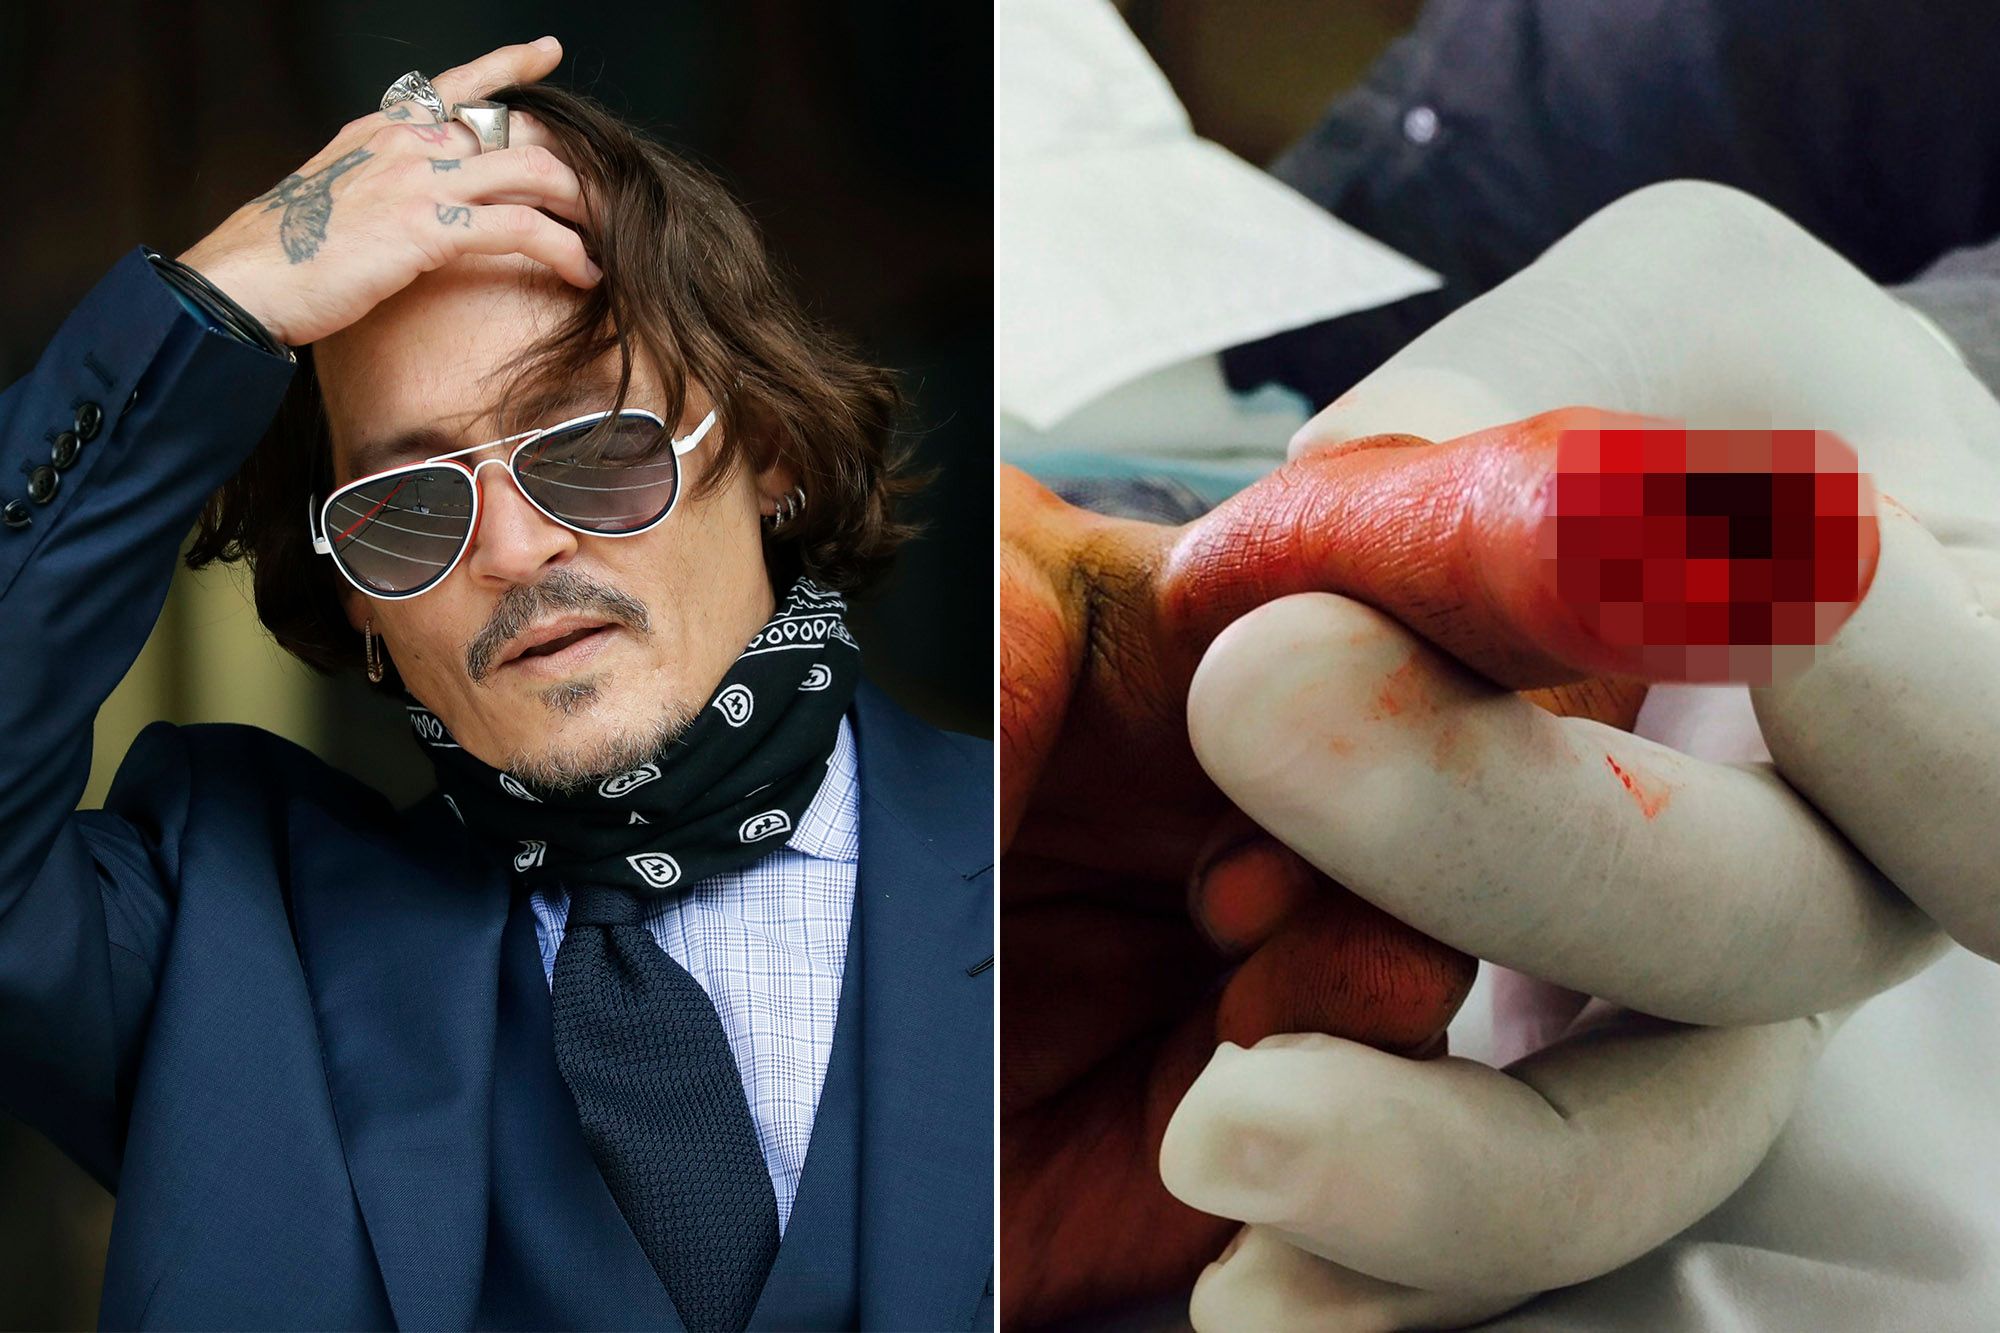 Johnny Depp Hand Injury Are Friends Concerned About Downward Spiral And Injury?